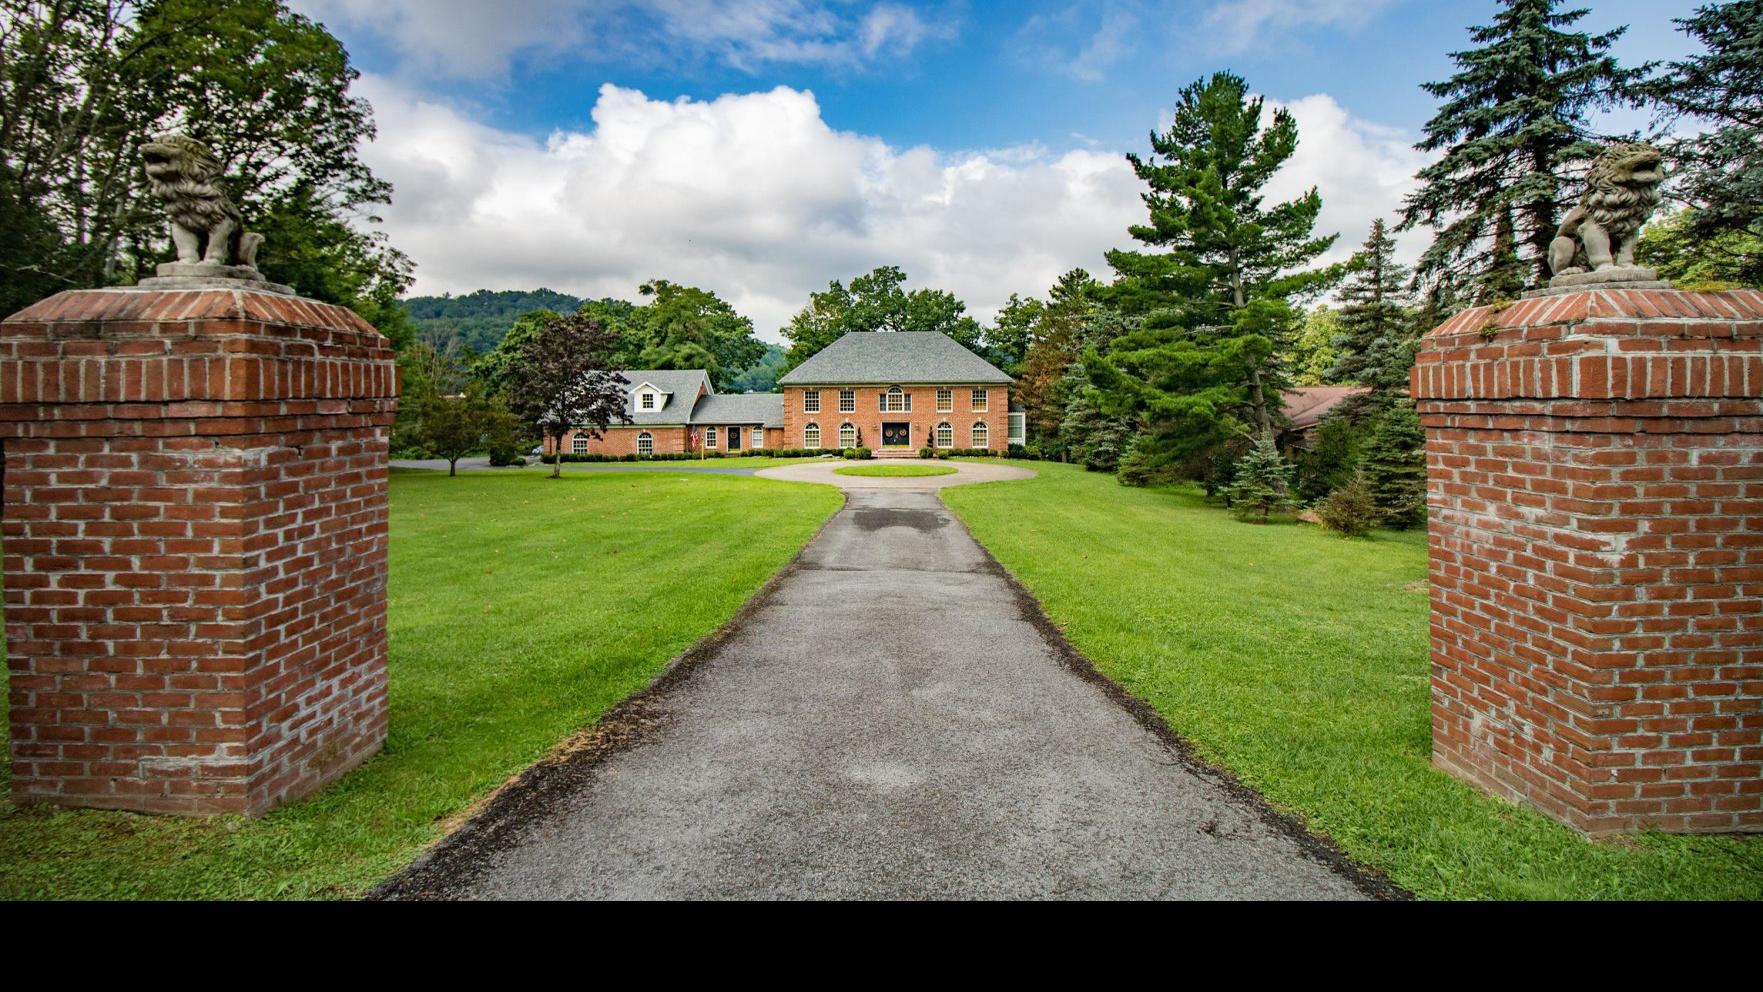 House Property Overlooking Cheat Lake Part Of Morgantown Wv Auction Oct 26 Wvhomes Wvnews Com - roblox auction house